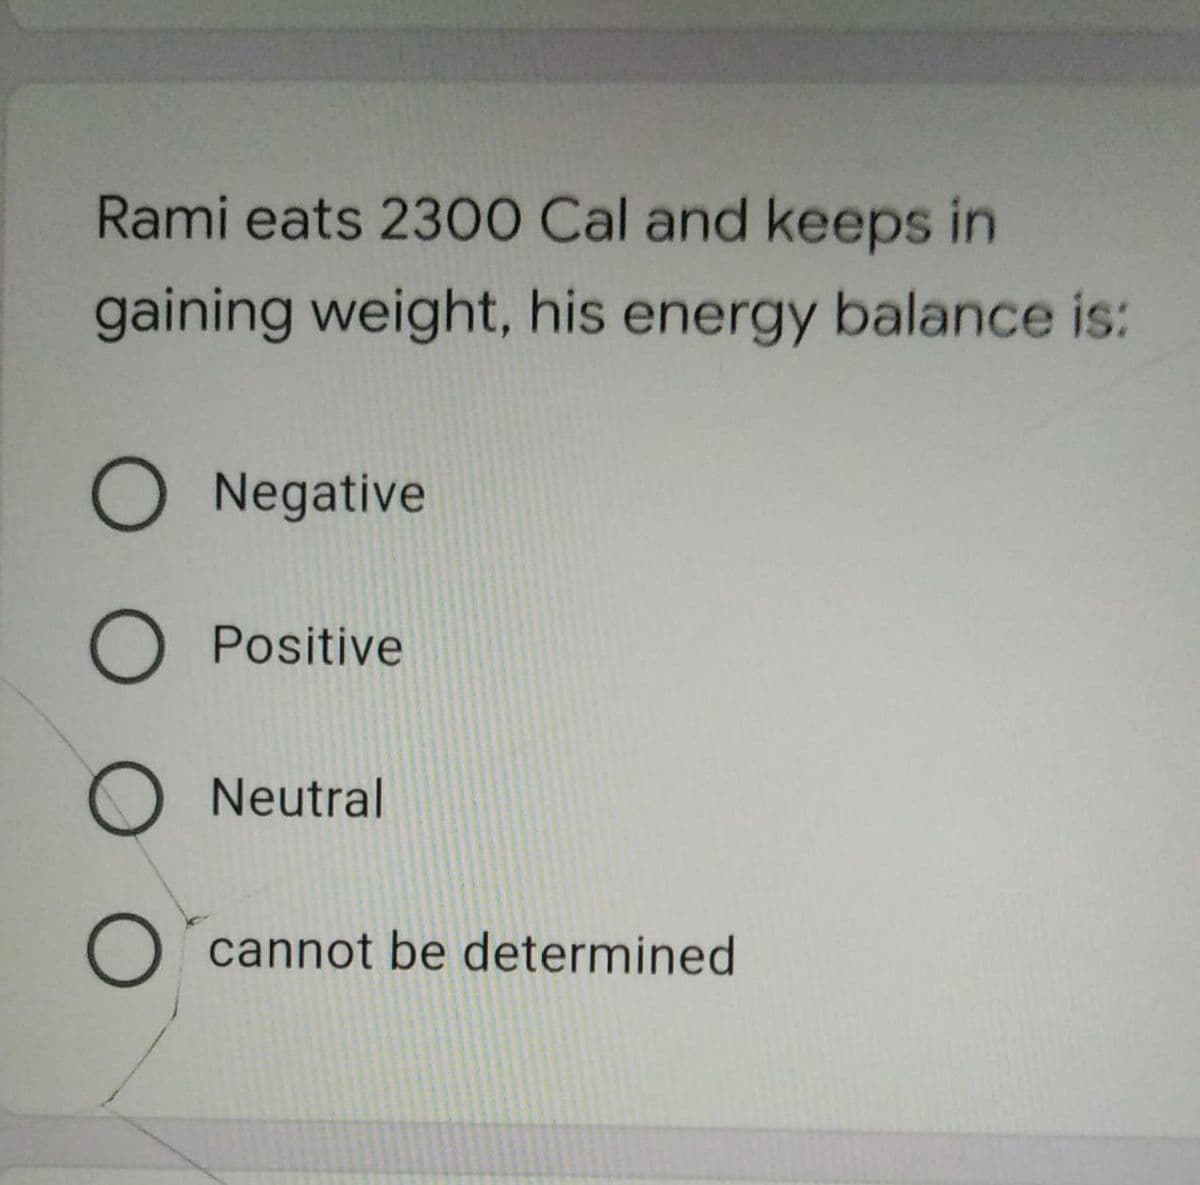 Rami eats 2300 Cal and keeps in
gaining weight, his energy balance is:
O Negative
O Positive
O Neutral
O cannot be determined
